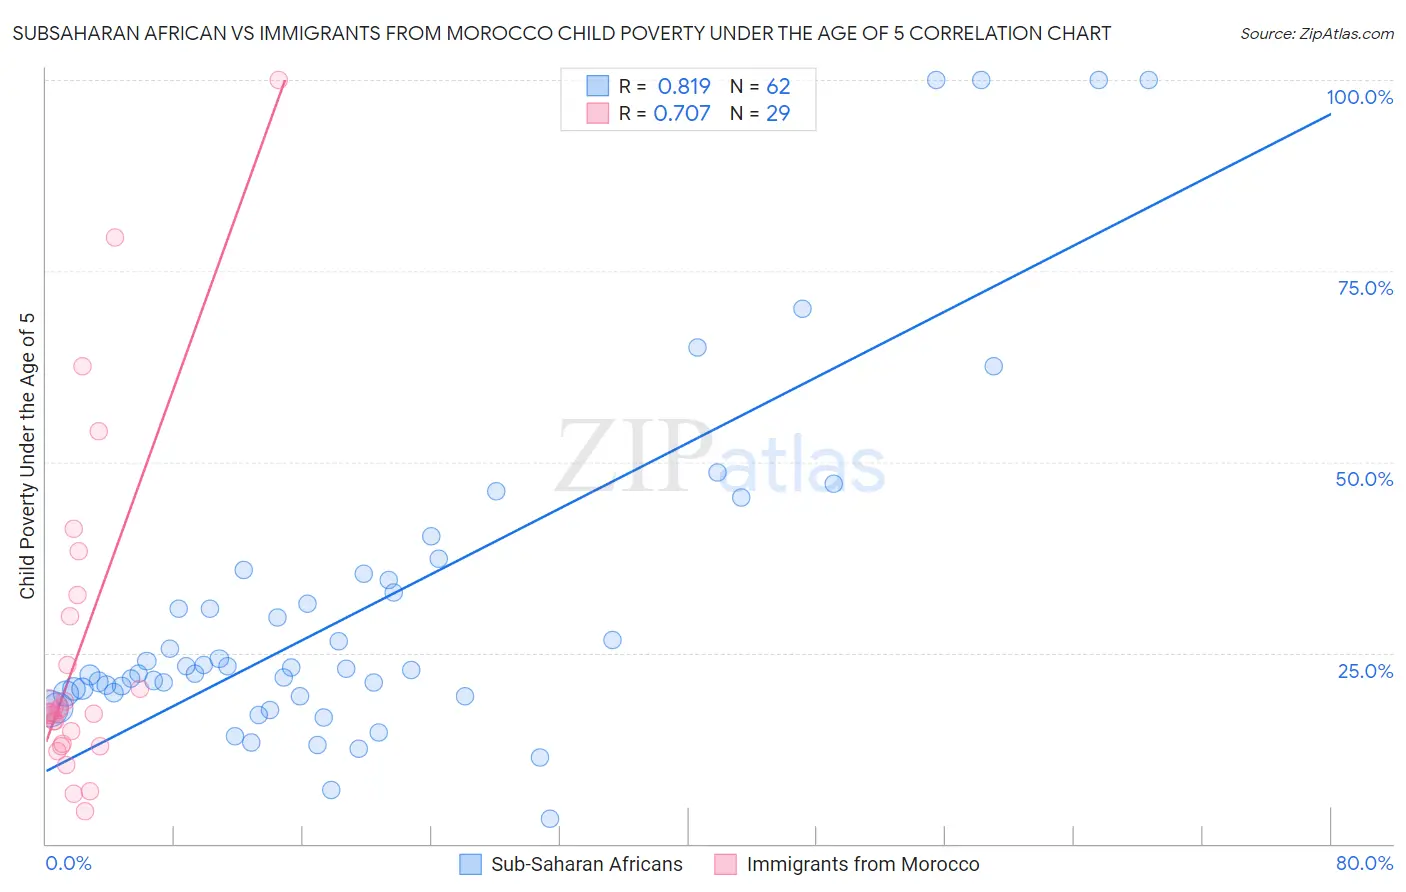 Subsaharan African vs Immigrants from Morocco Child Poverty Under the Age of 5